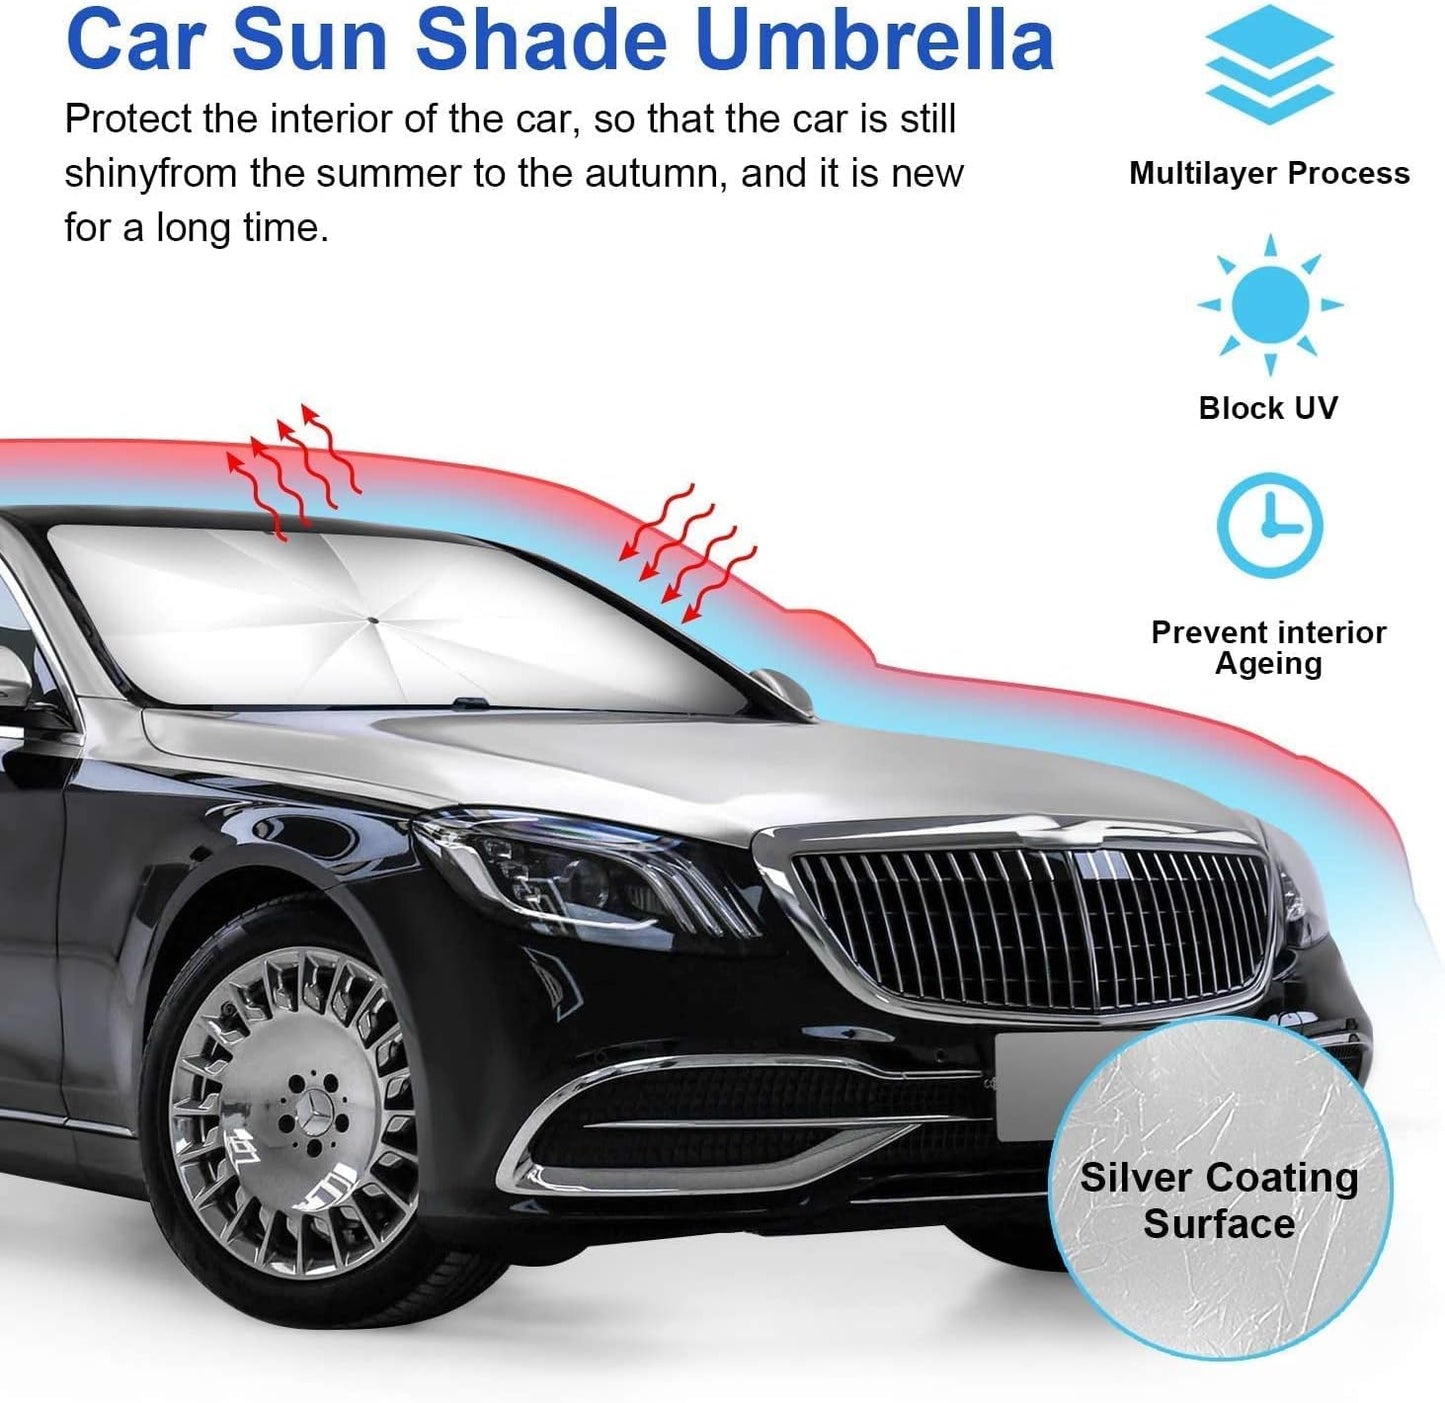 Enew Car Sun Shade,for Car Front Windshield, Car Umbrella Sun Shade Cover, Foldable UV Reflector And Heat, Sunshade for Cars, Fits Most Vans SUVS (57 x 31 In), Black